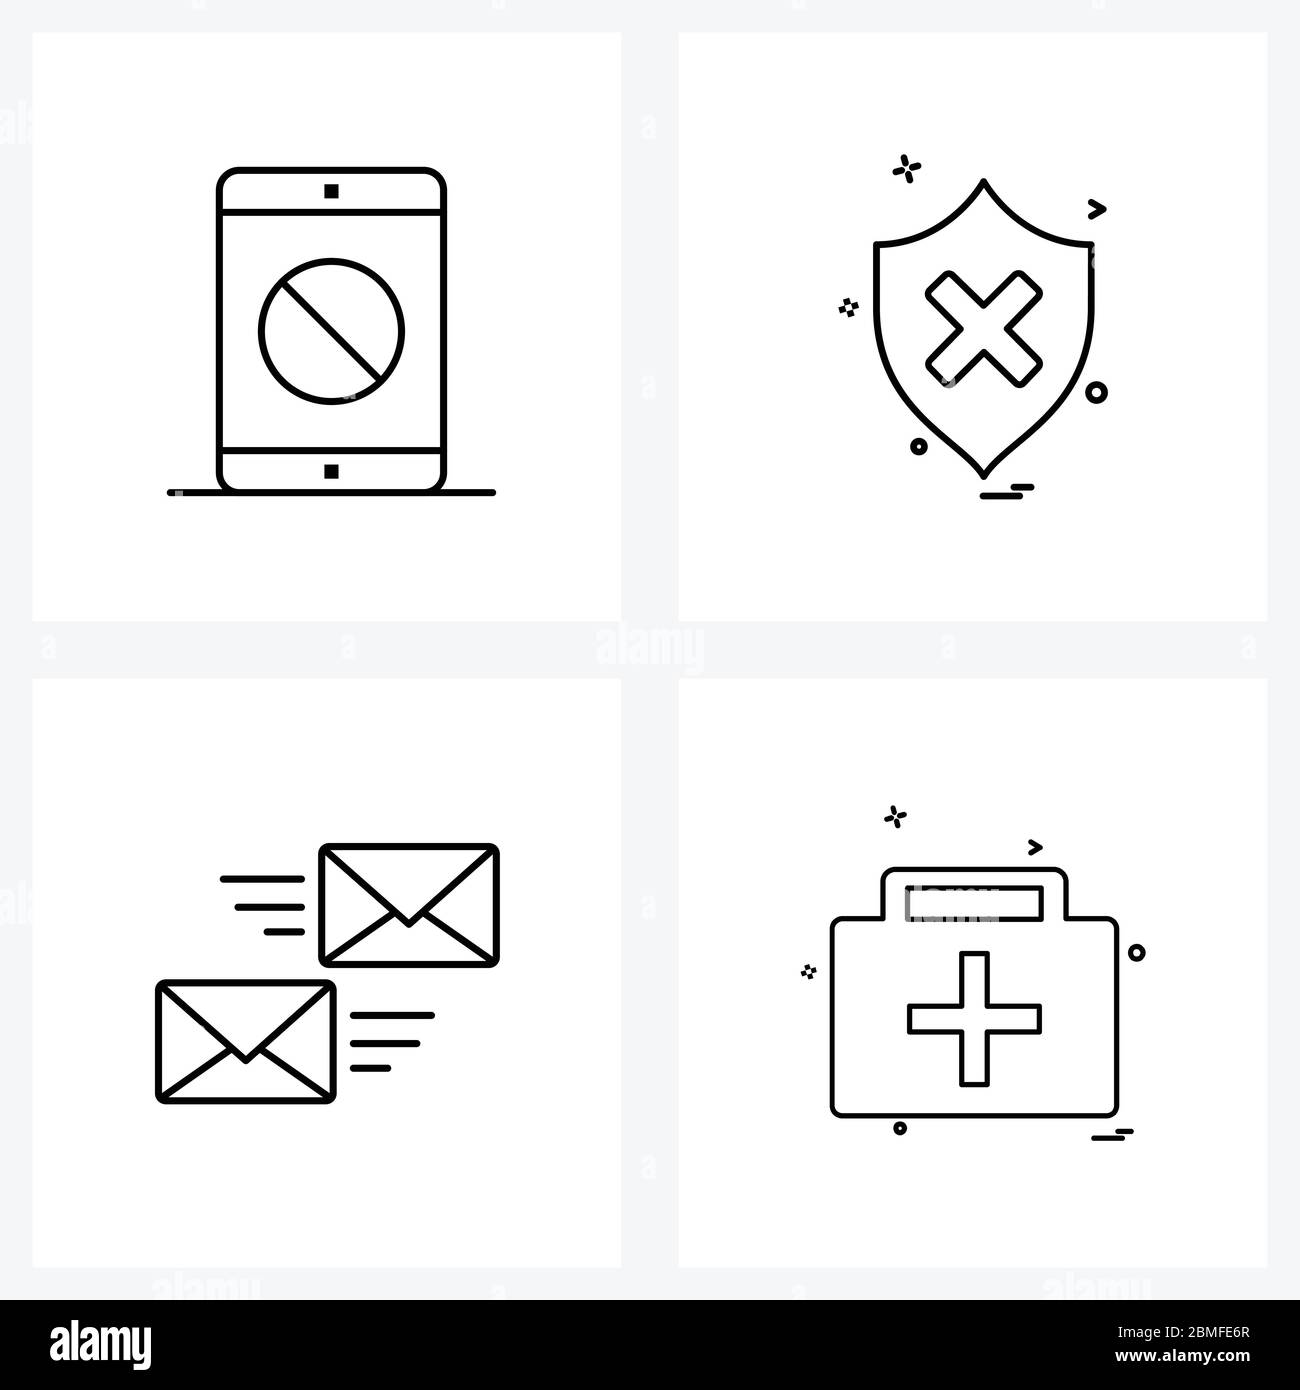 4 Universal Icons Pixel Perfect Symbols of blocked, message, phone, locked, sms Vector Illustration Stock Vector